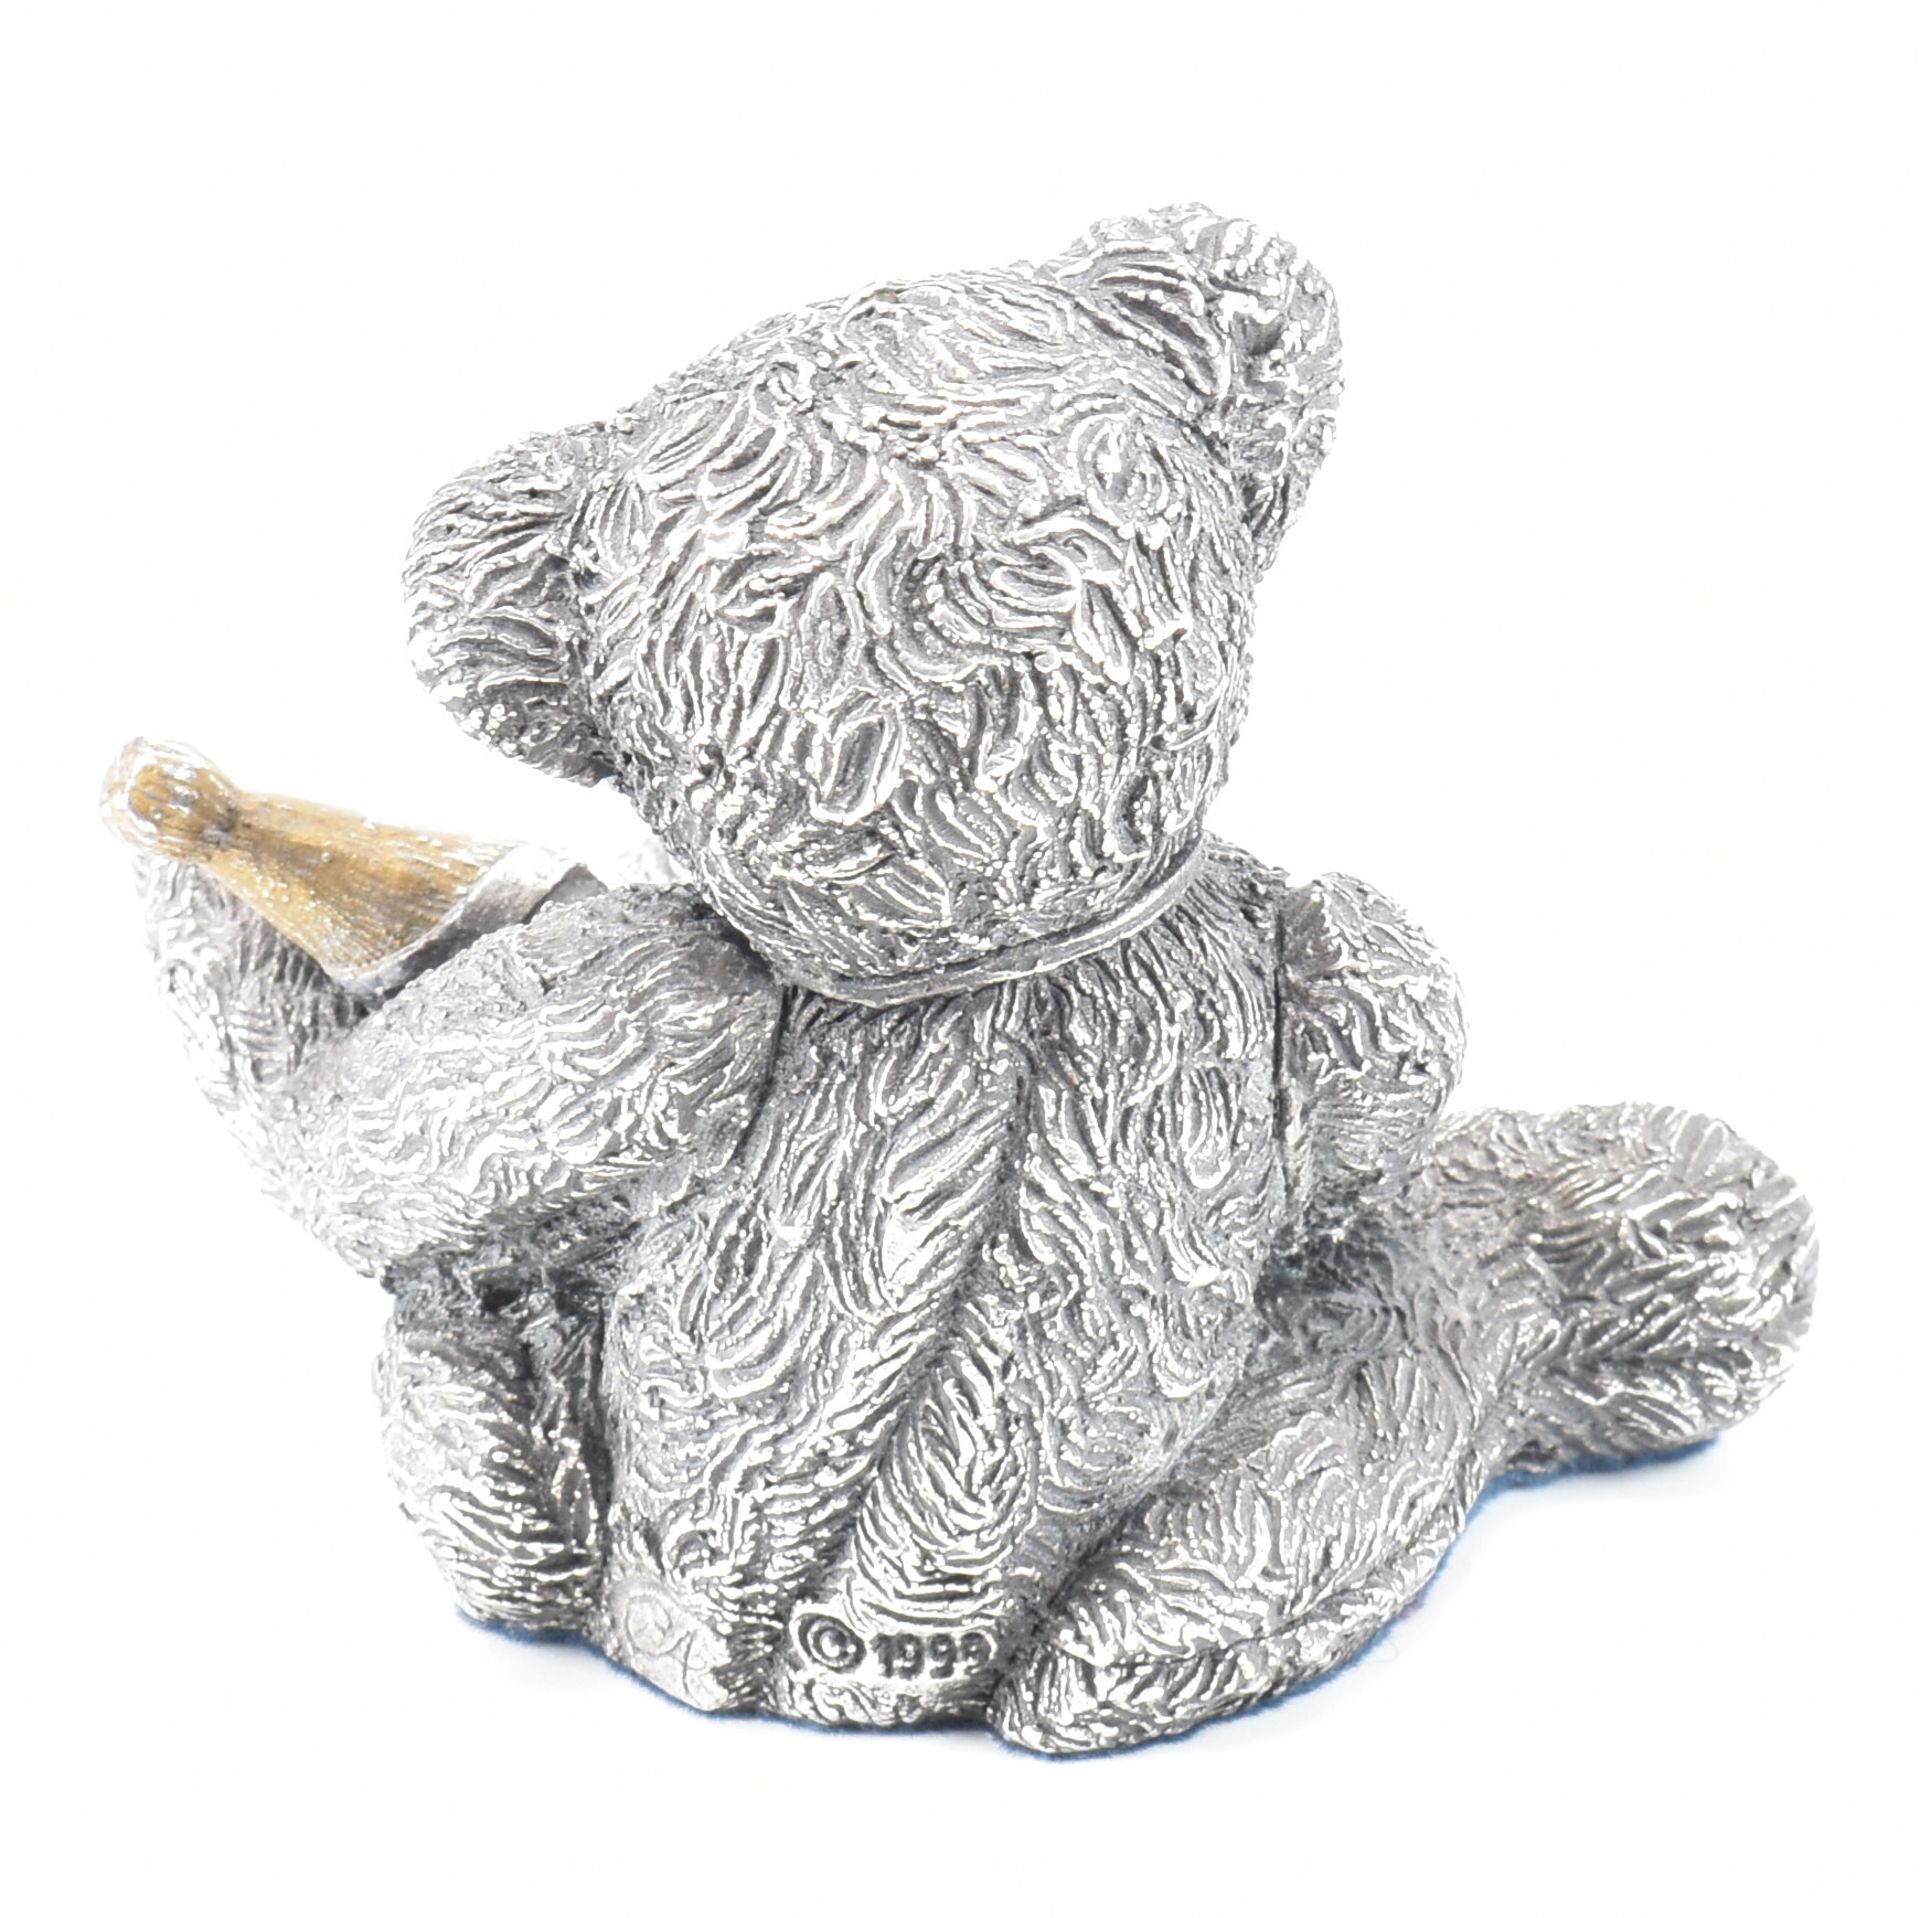 HALLMARKED SILVER COUNTRY ARTISTS FIGURE OF A BEAR - Image 2 of 5